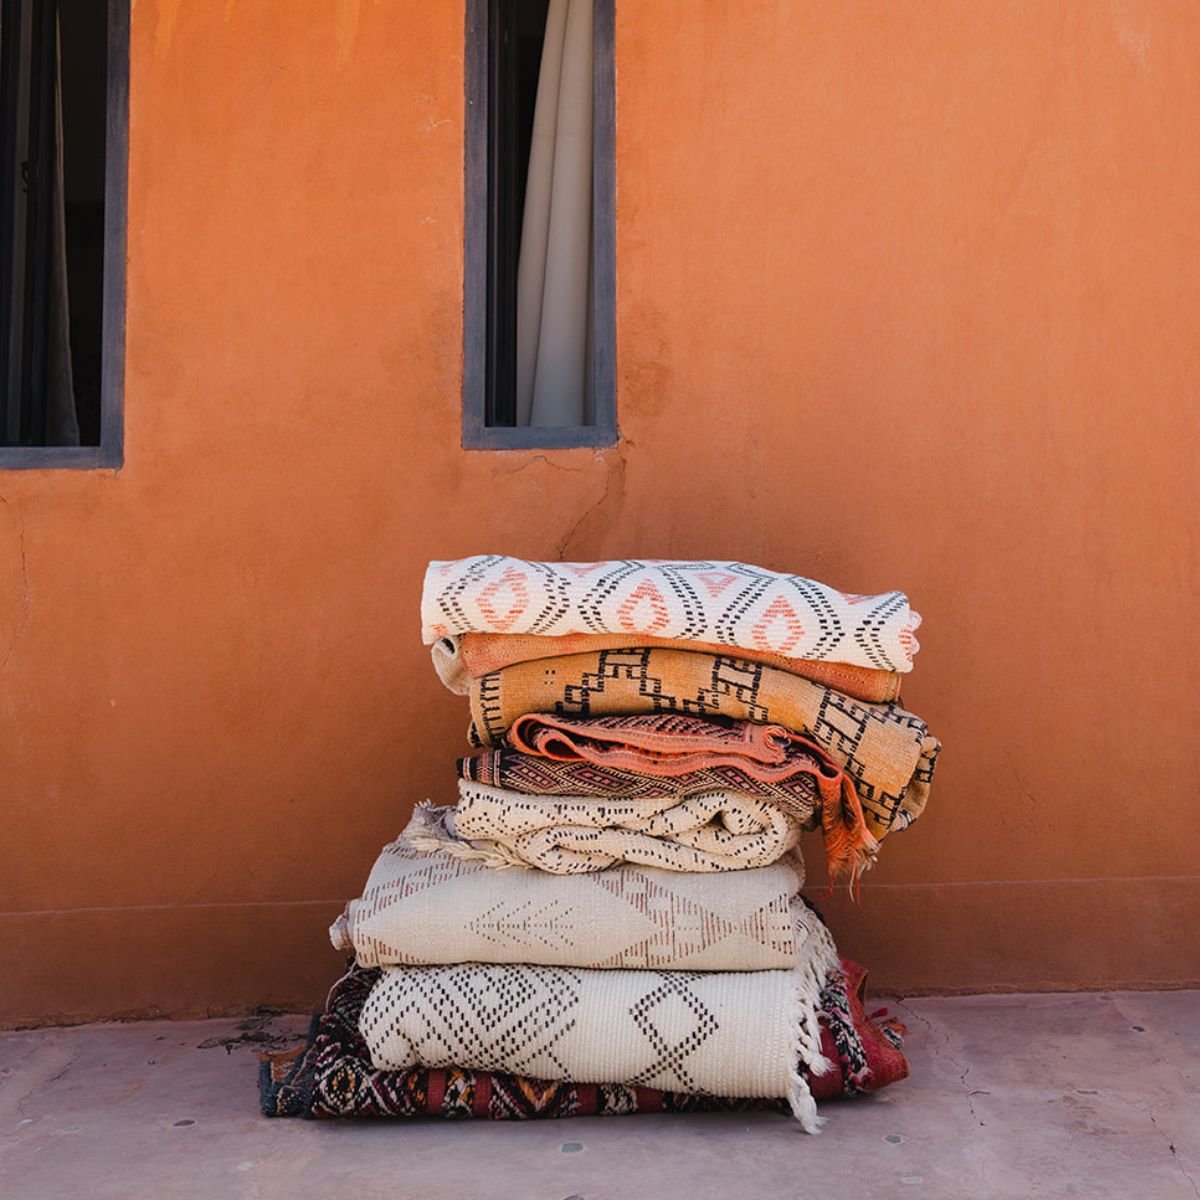 Moroccan Rugs Online - A pile of rugs stacked - Nouvelle Nomad